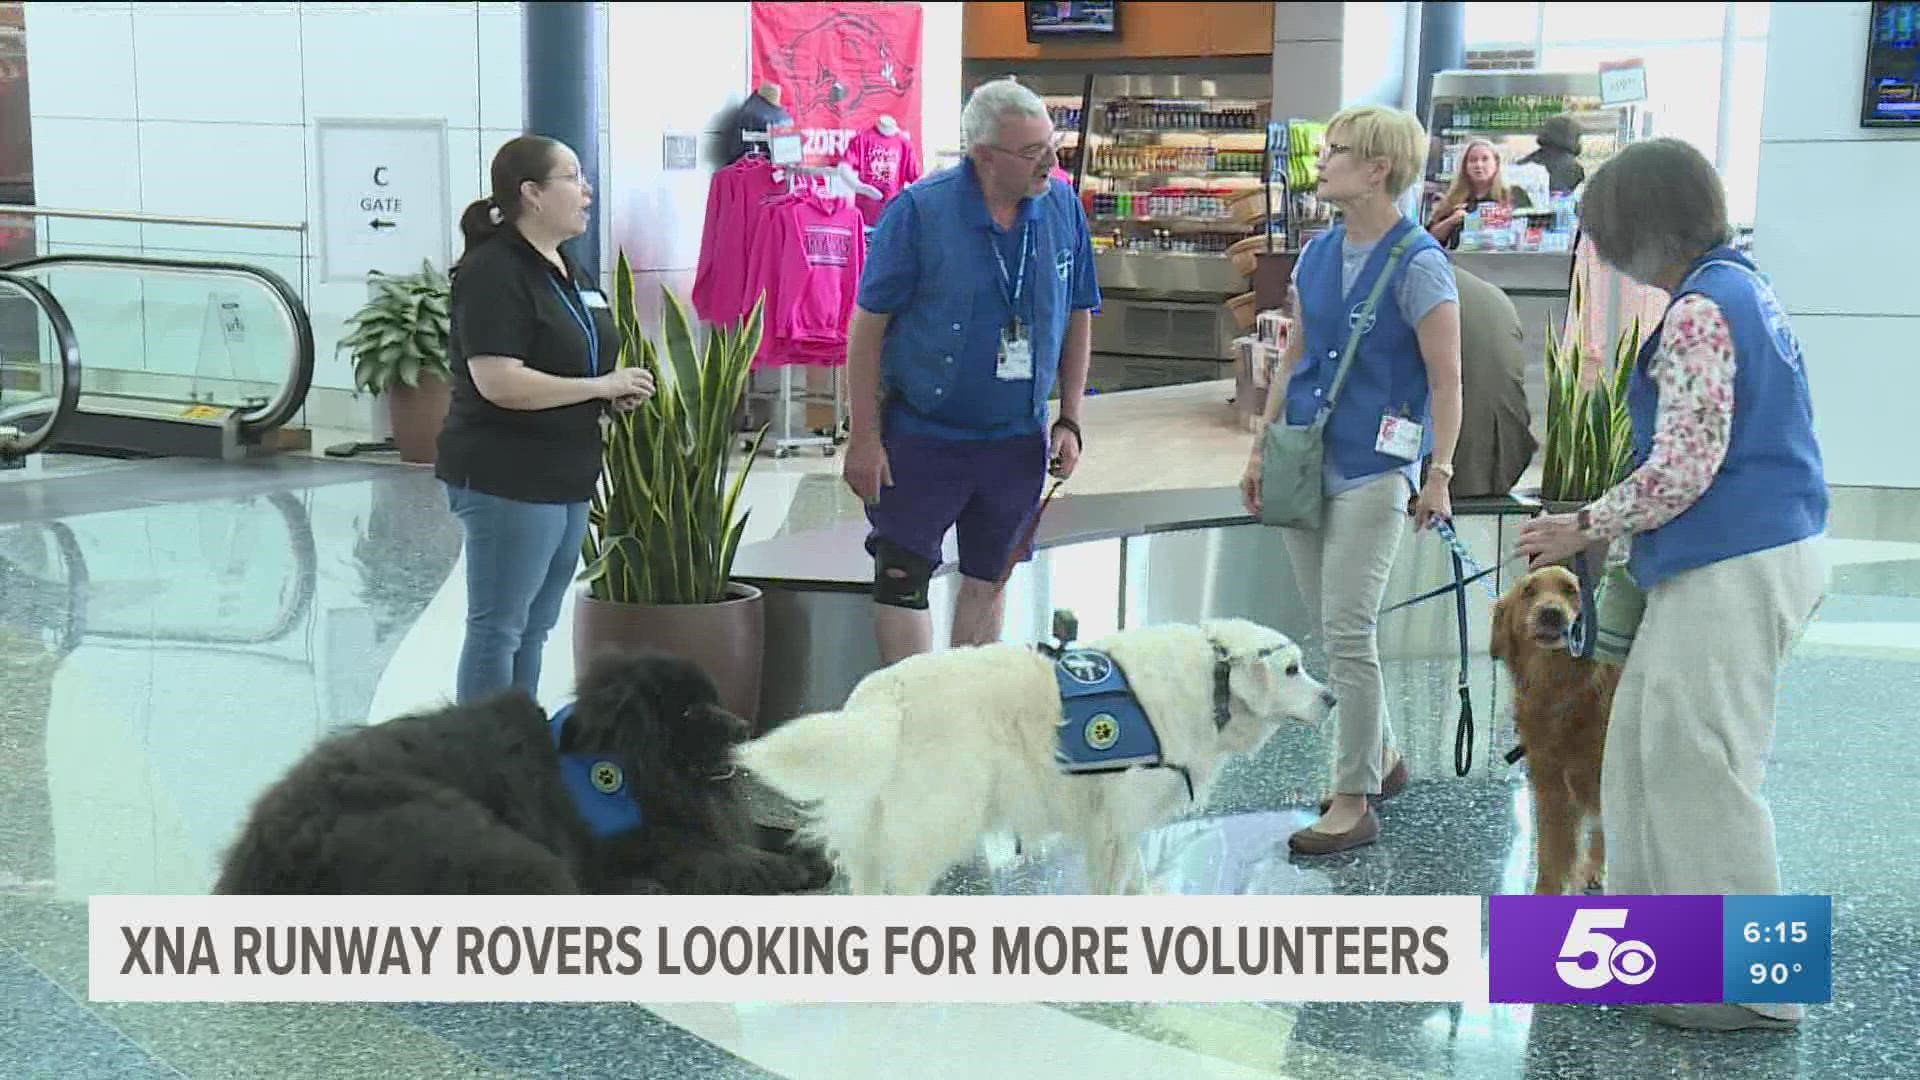 After taking a break during the height of the COVID-19 pandemic, the XNA Runway Rovers program is back and looking for more volunteers to interact with passengers.